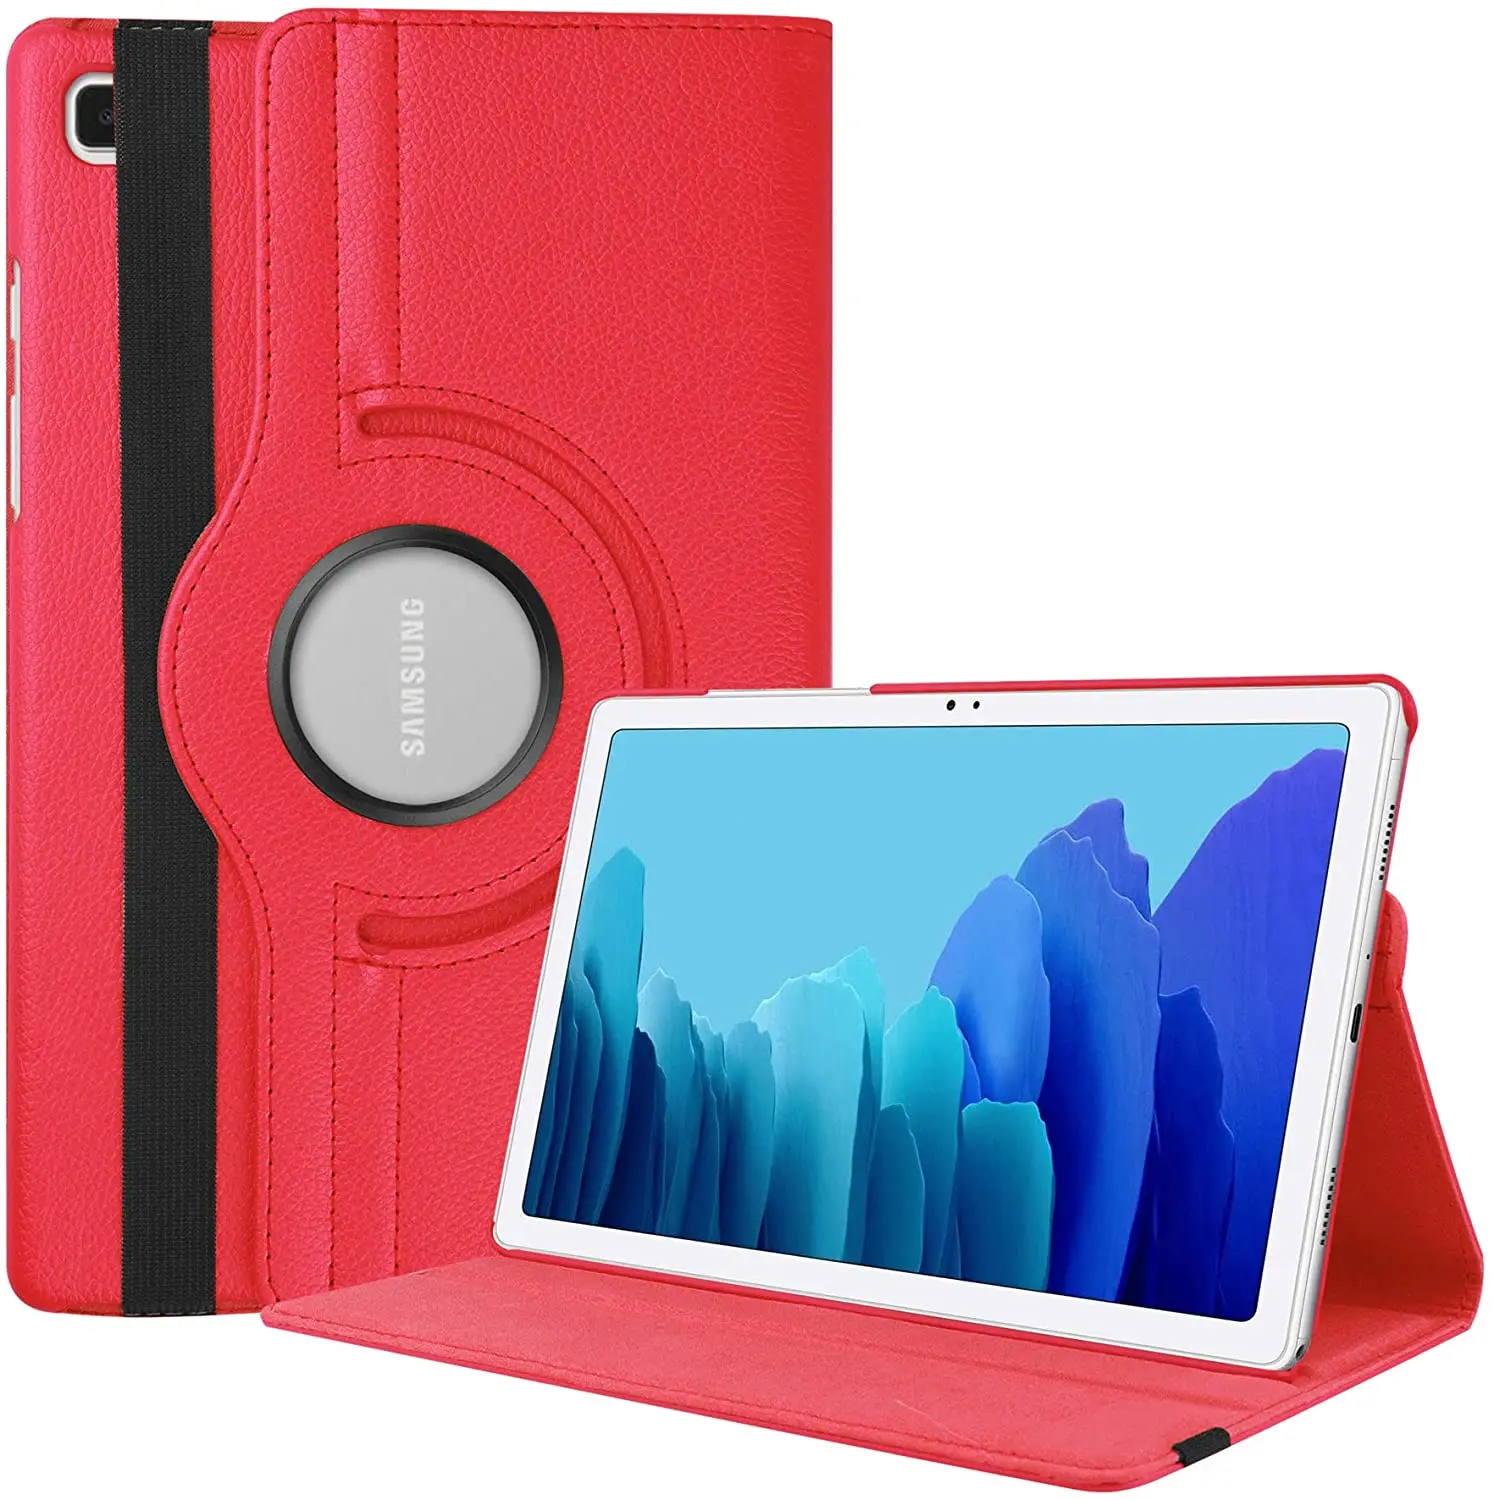 360 Rotating Smart Case for Samsung Galaxy Tab A7 10.4 inch 2020 SM-T500/T505 Premium PU Leather Swivel Stand Cover for SM-T517